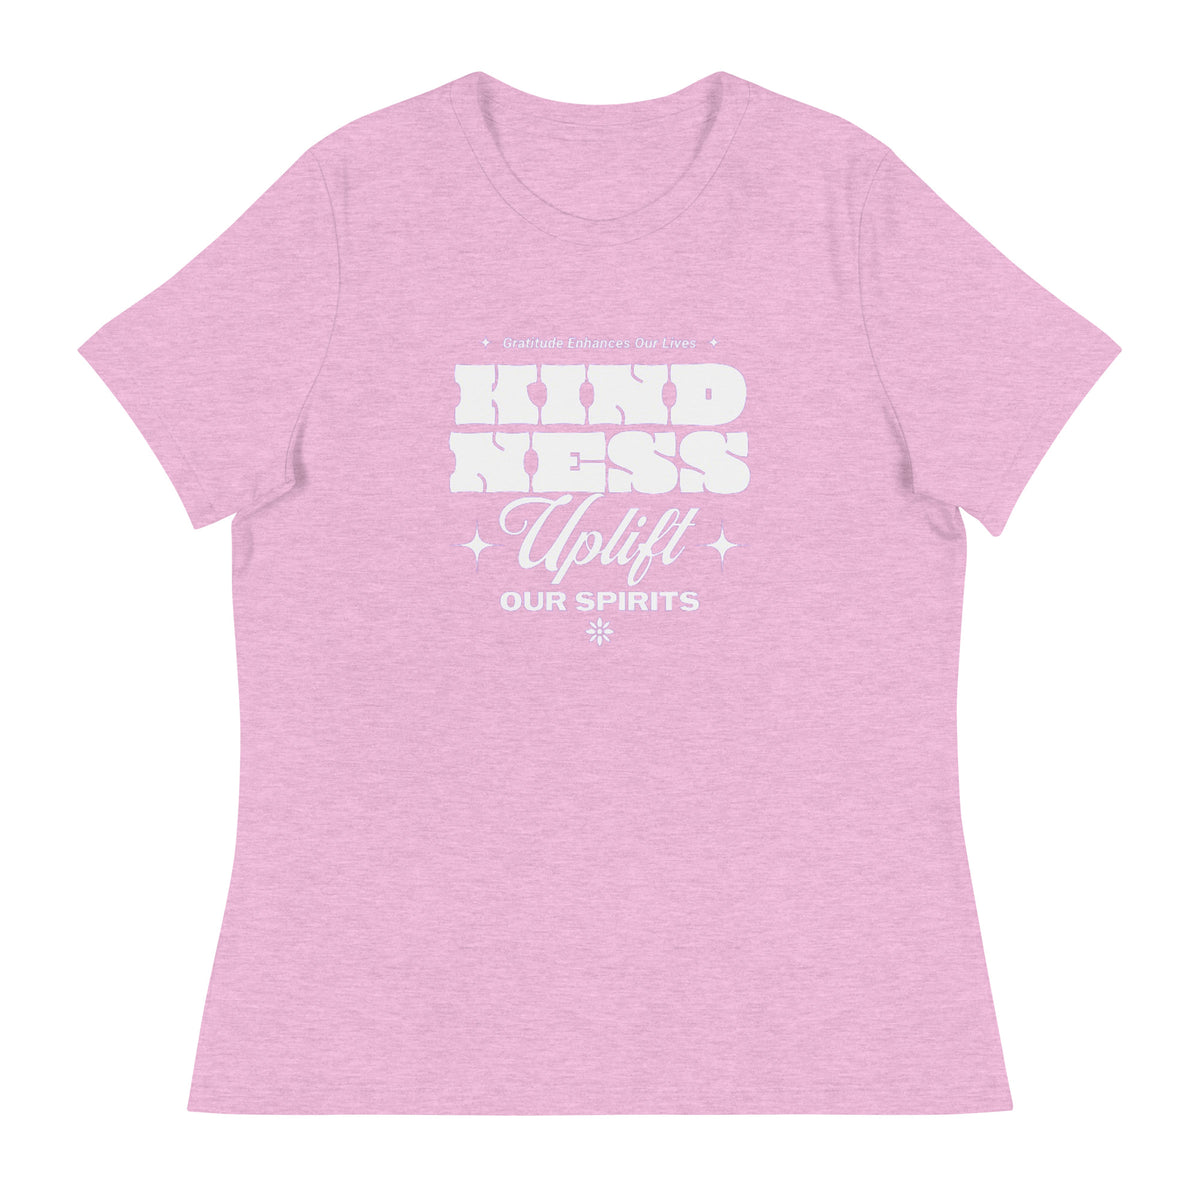 Kindness Uplift Our Spirits T-Shirts